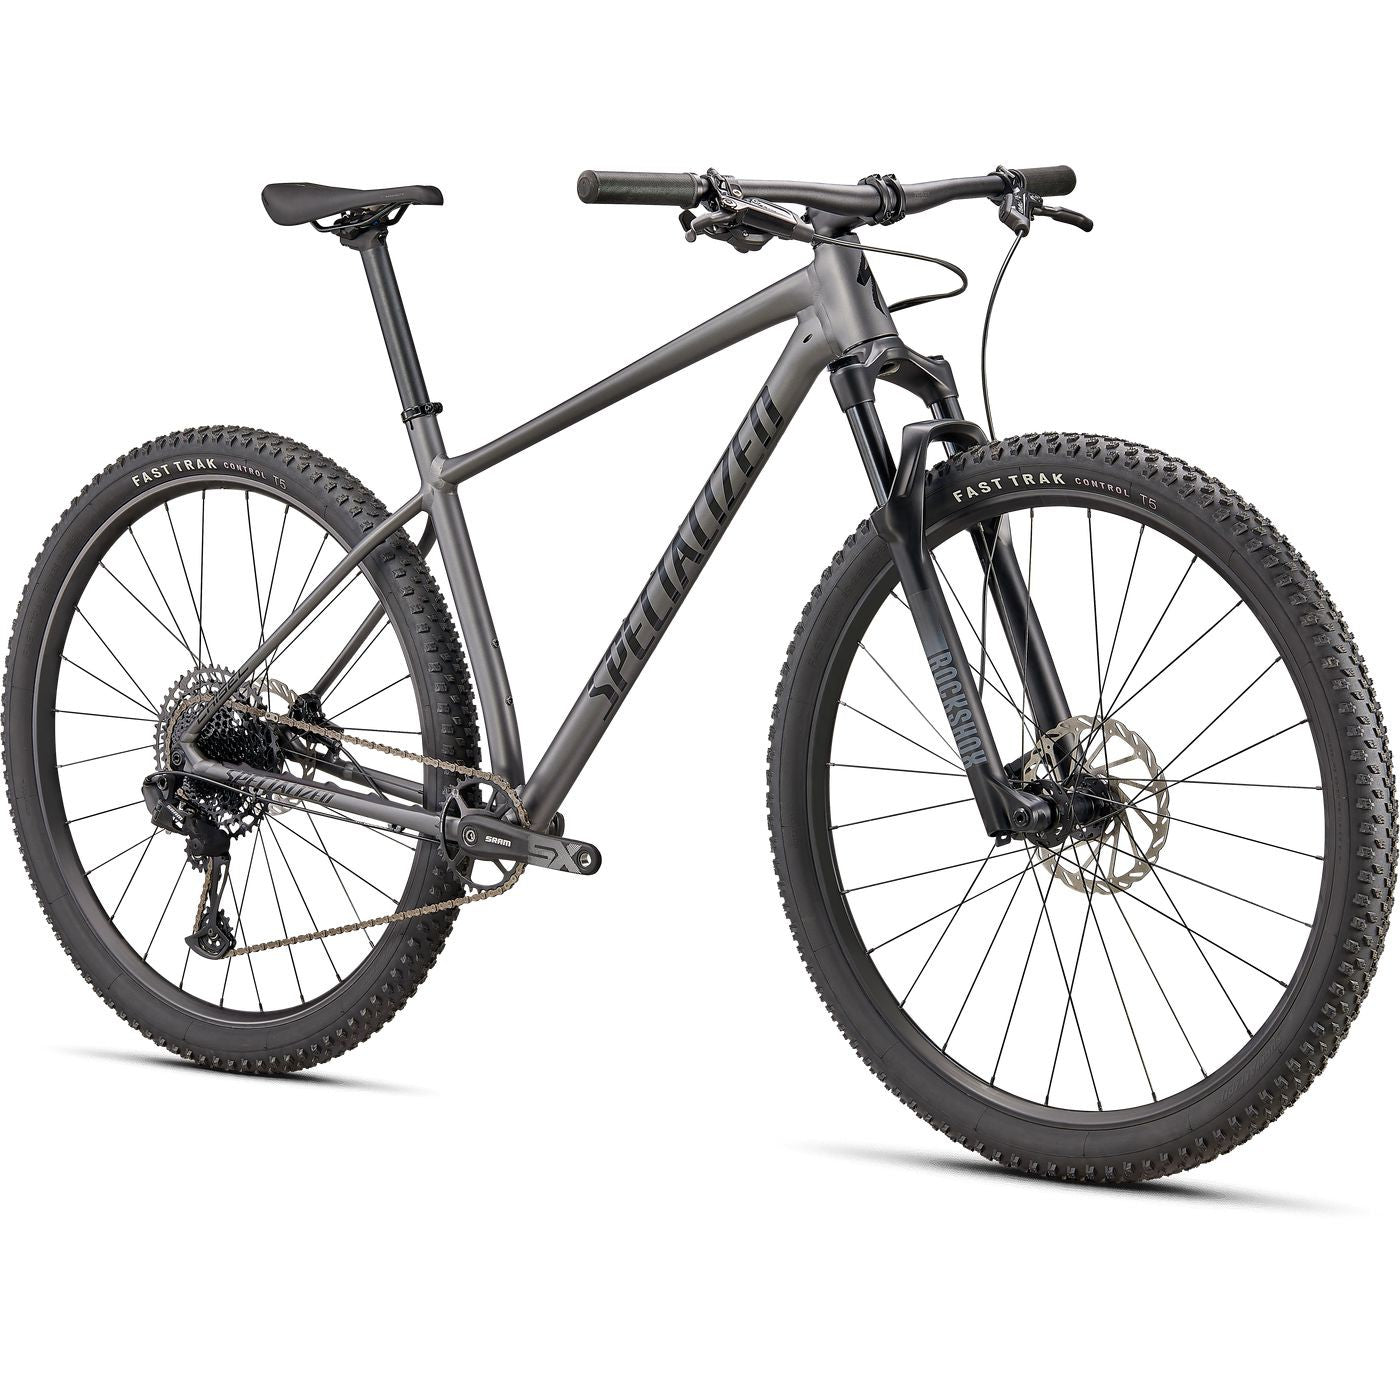 Specialized Chisel Hardtail 29" Mountain Bike - Bikes - Bicycle Warehouse